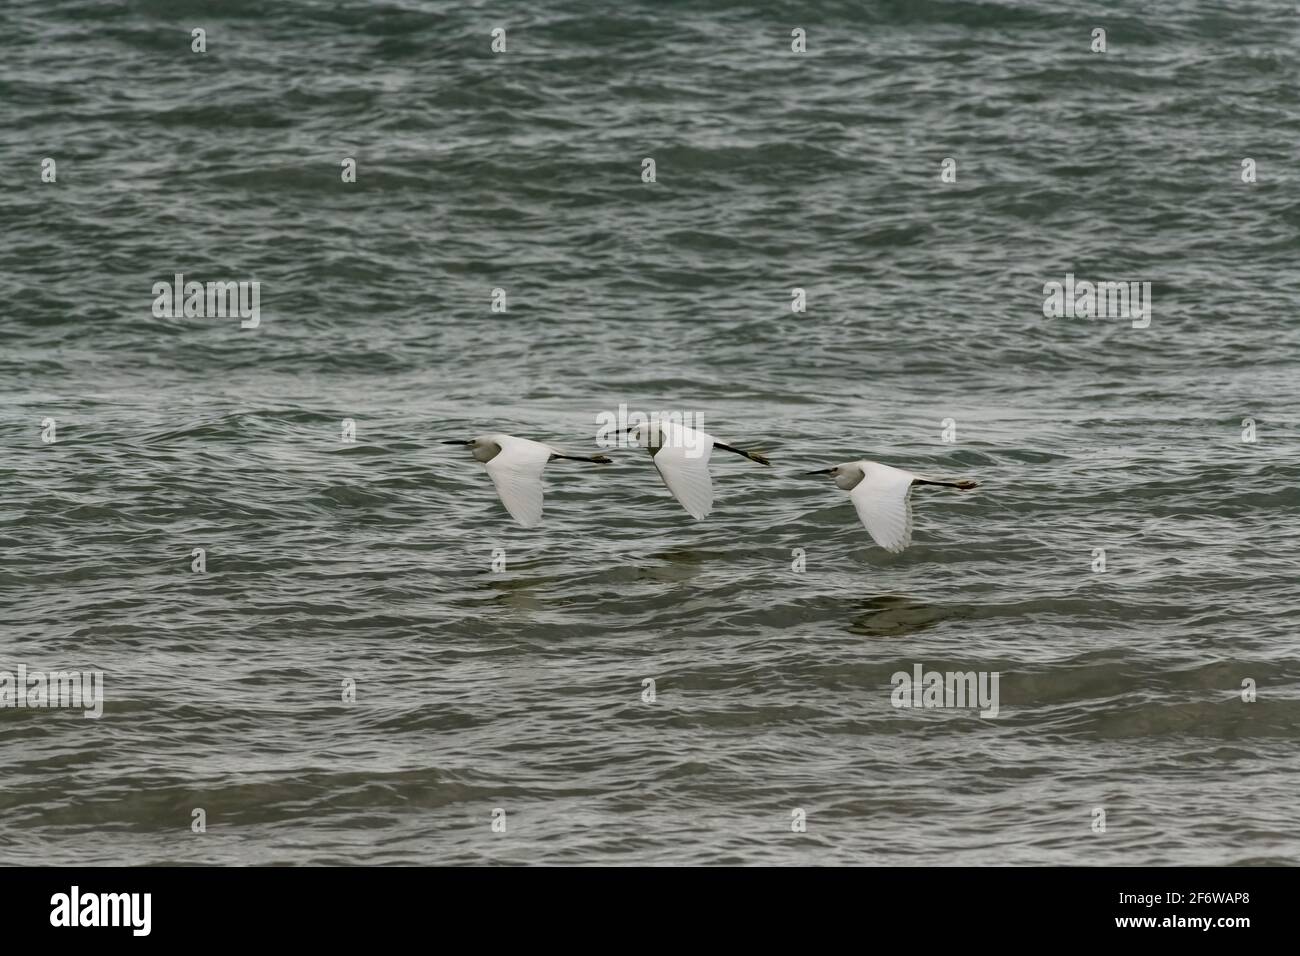 A Group Of Three Snowy White Egrets Are Flying Over The Ocean Water Stock Photo